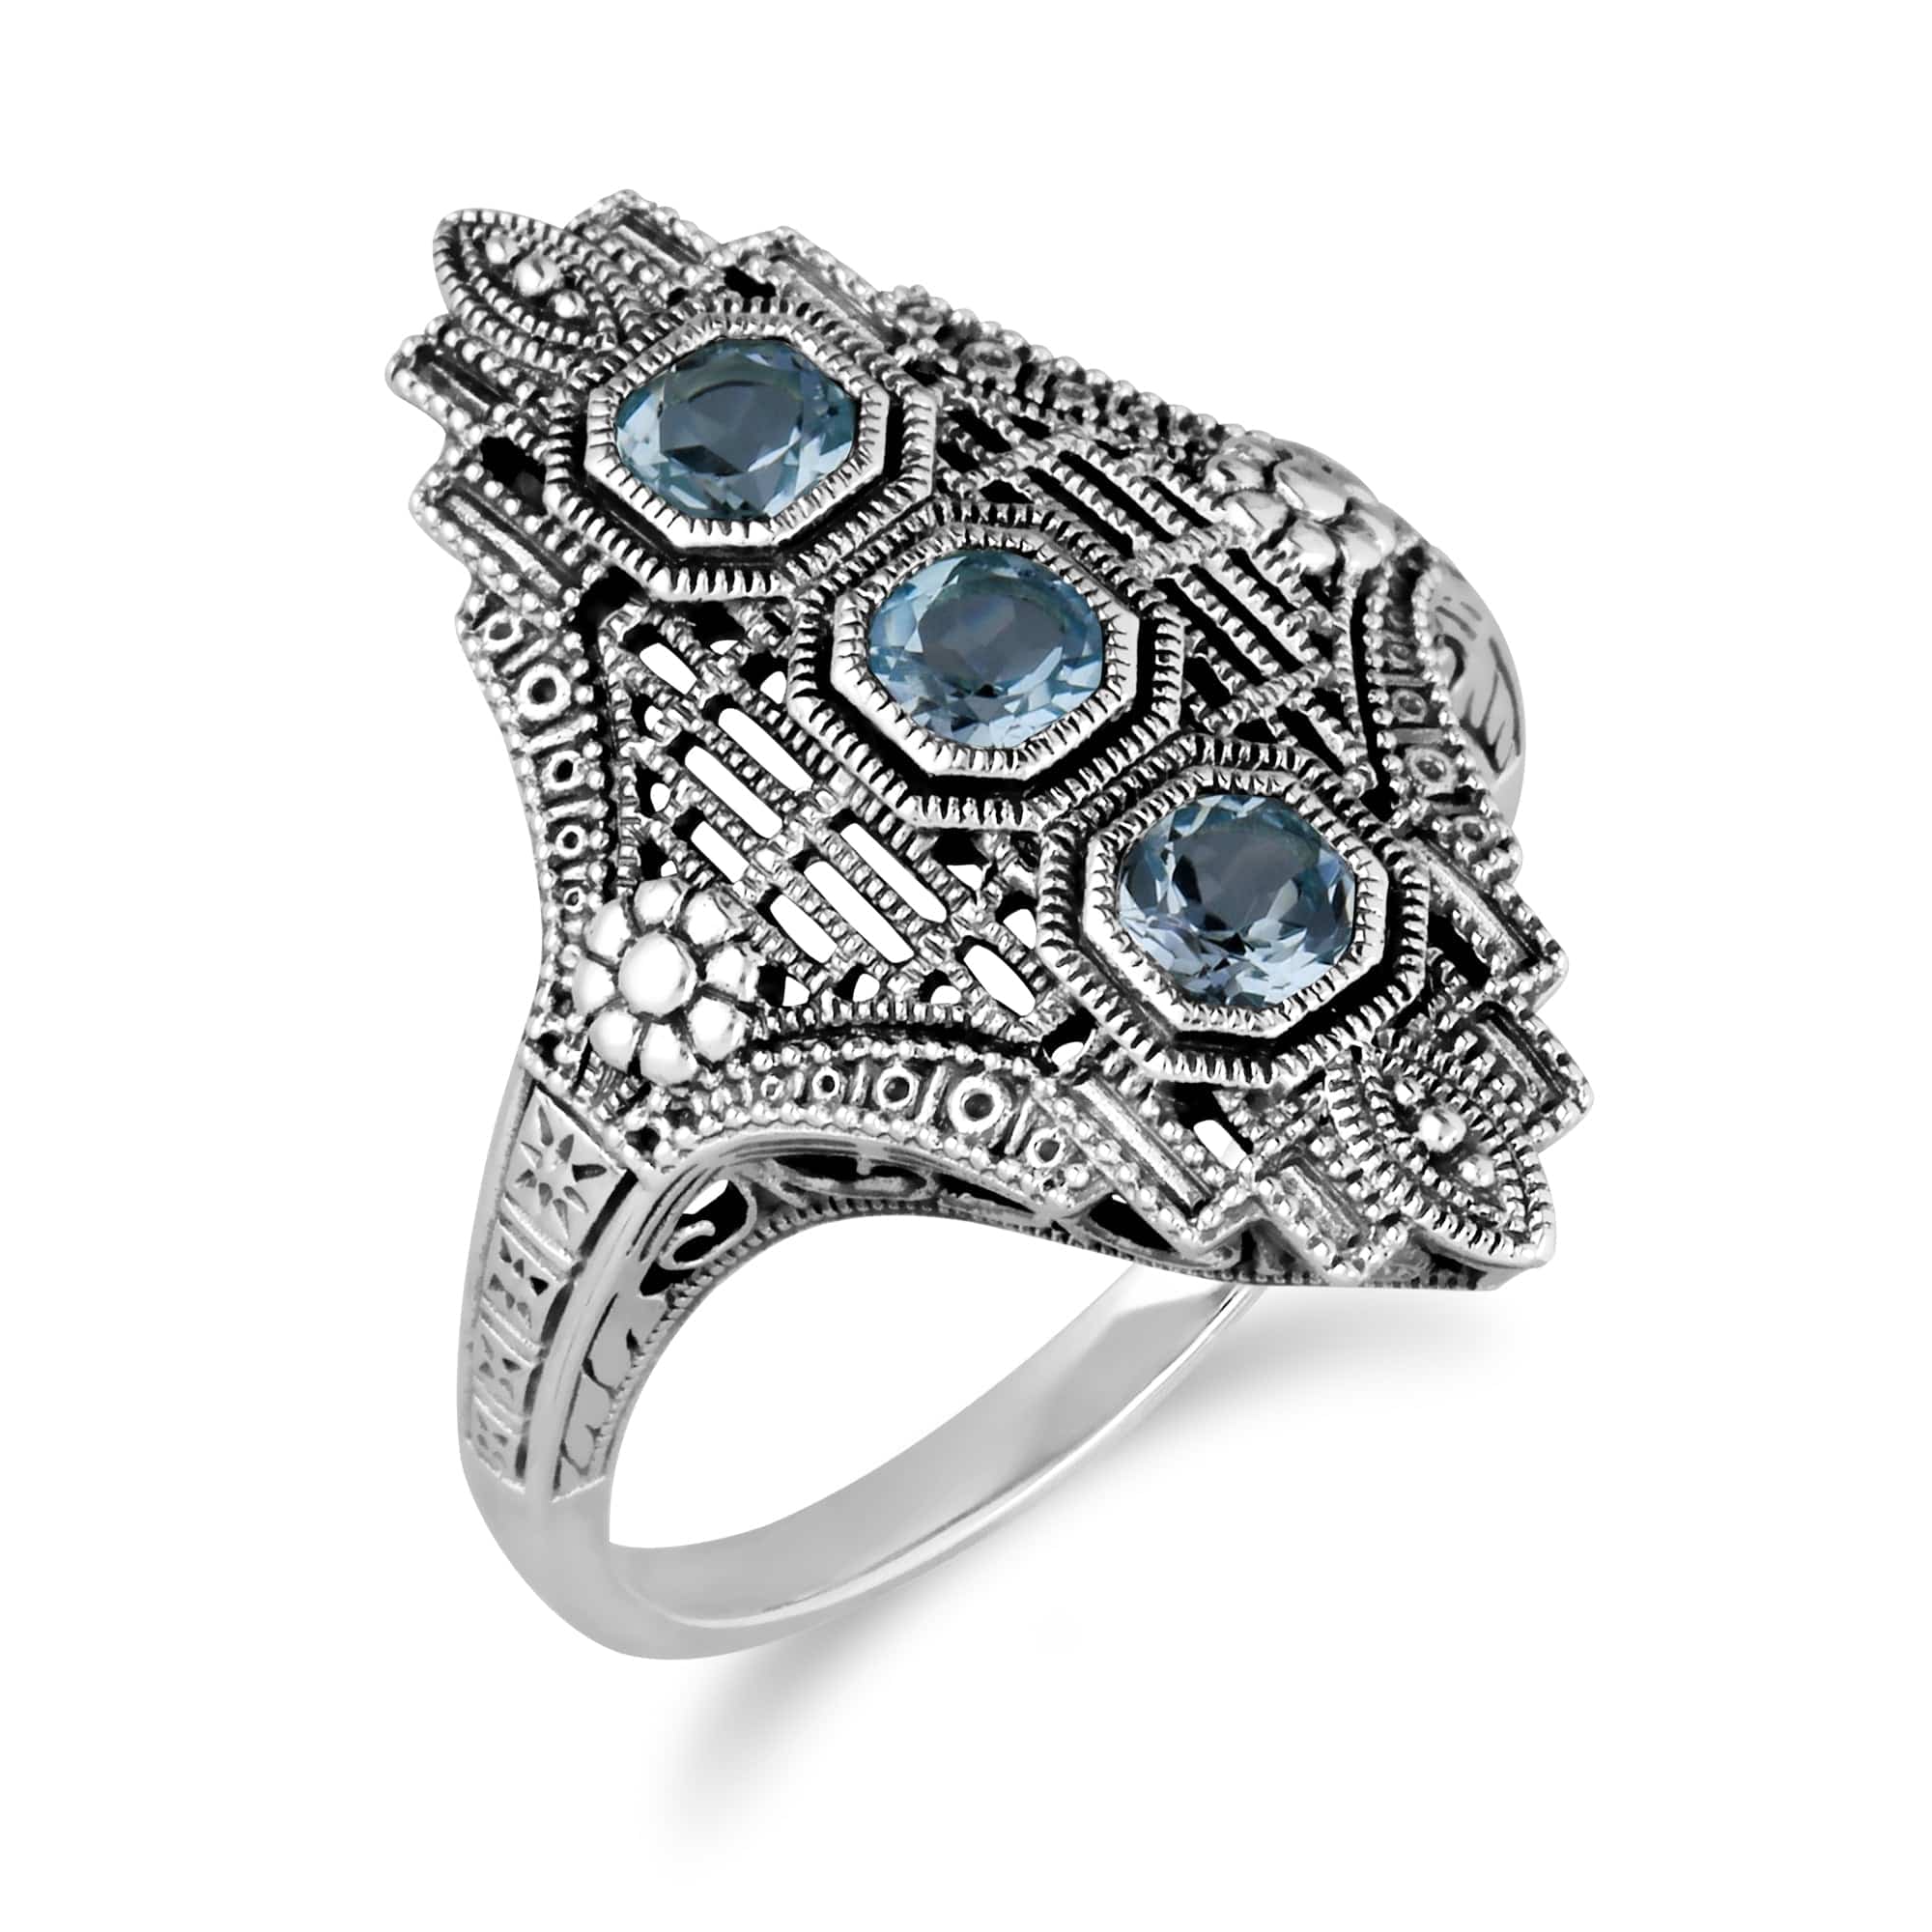 241R210503925 Art Nouveau Style Octagon Blue Topaz Three Stone Filigree Statement Ring in 925 Sterling Silver 3